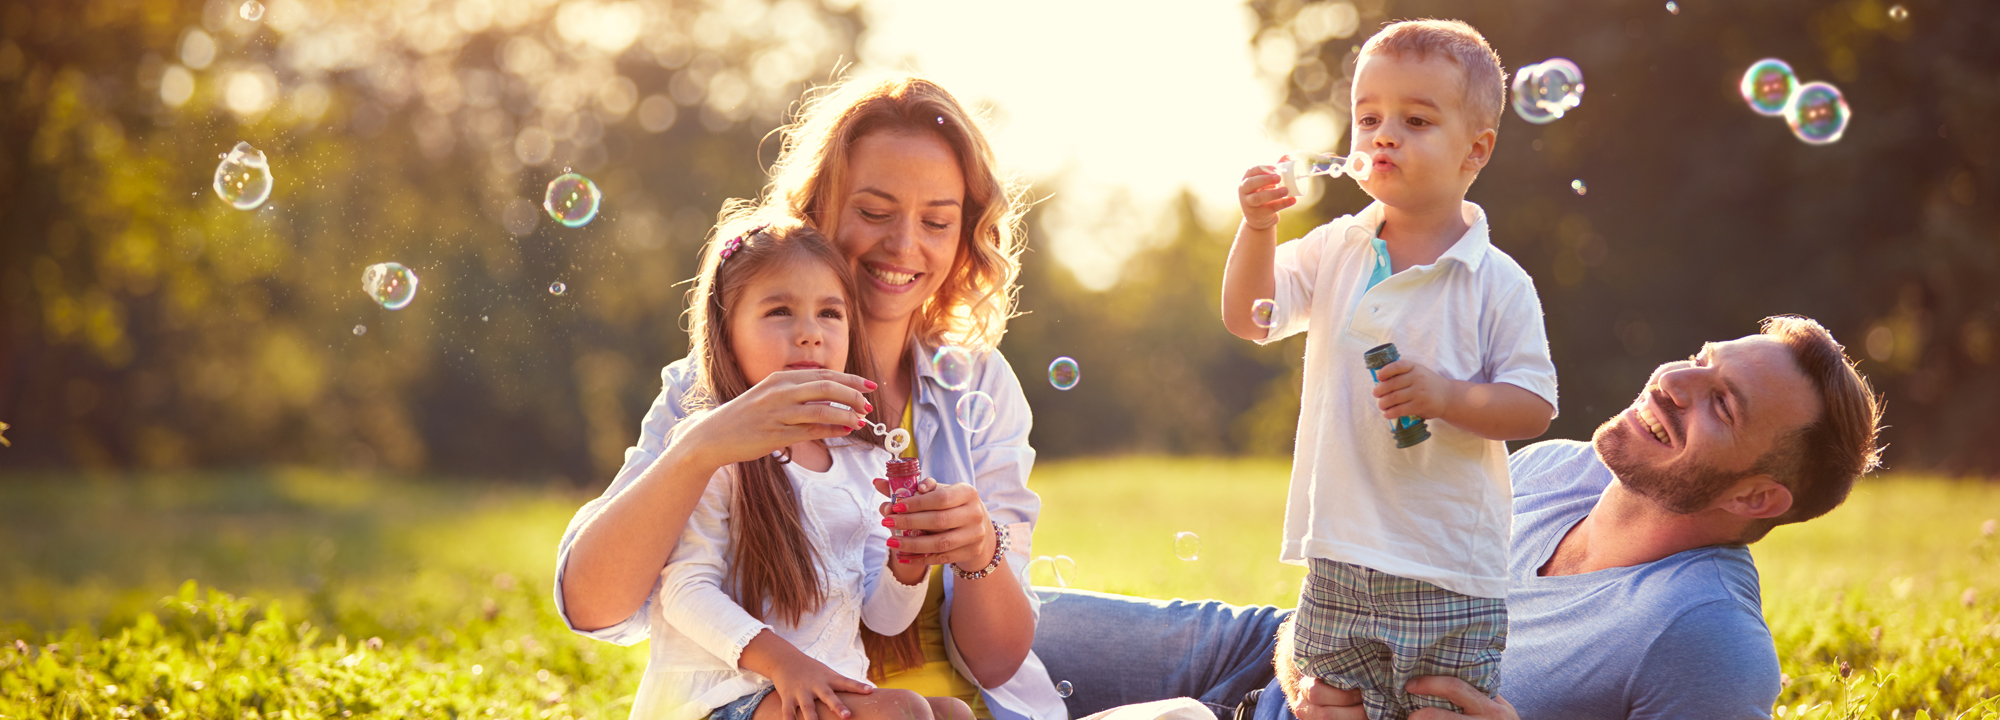 Family With Children Blowing Soap Bubbles Outdoor